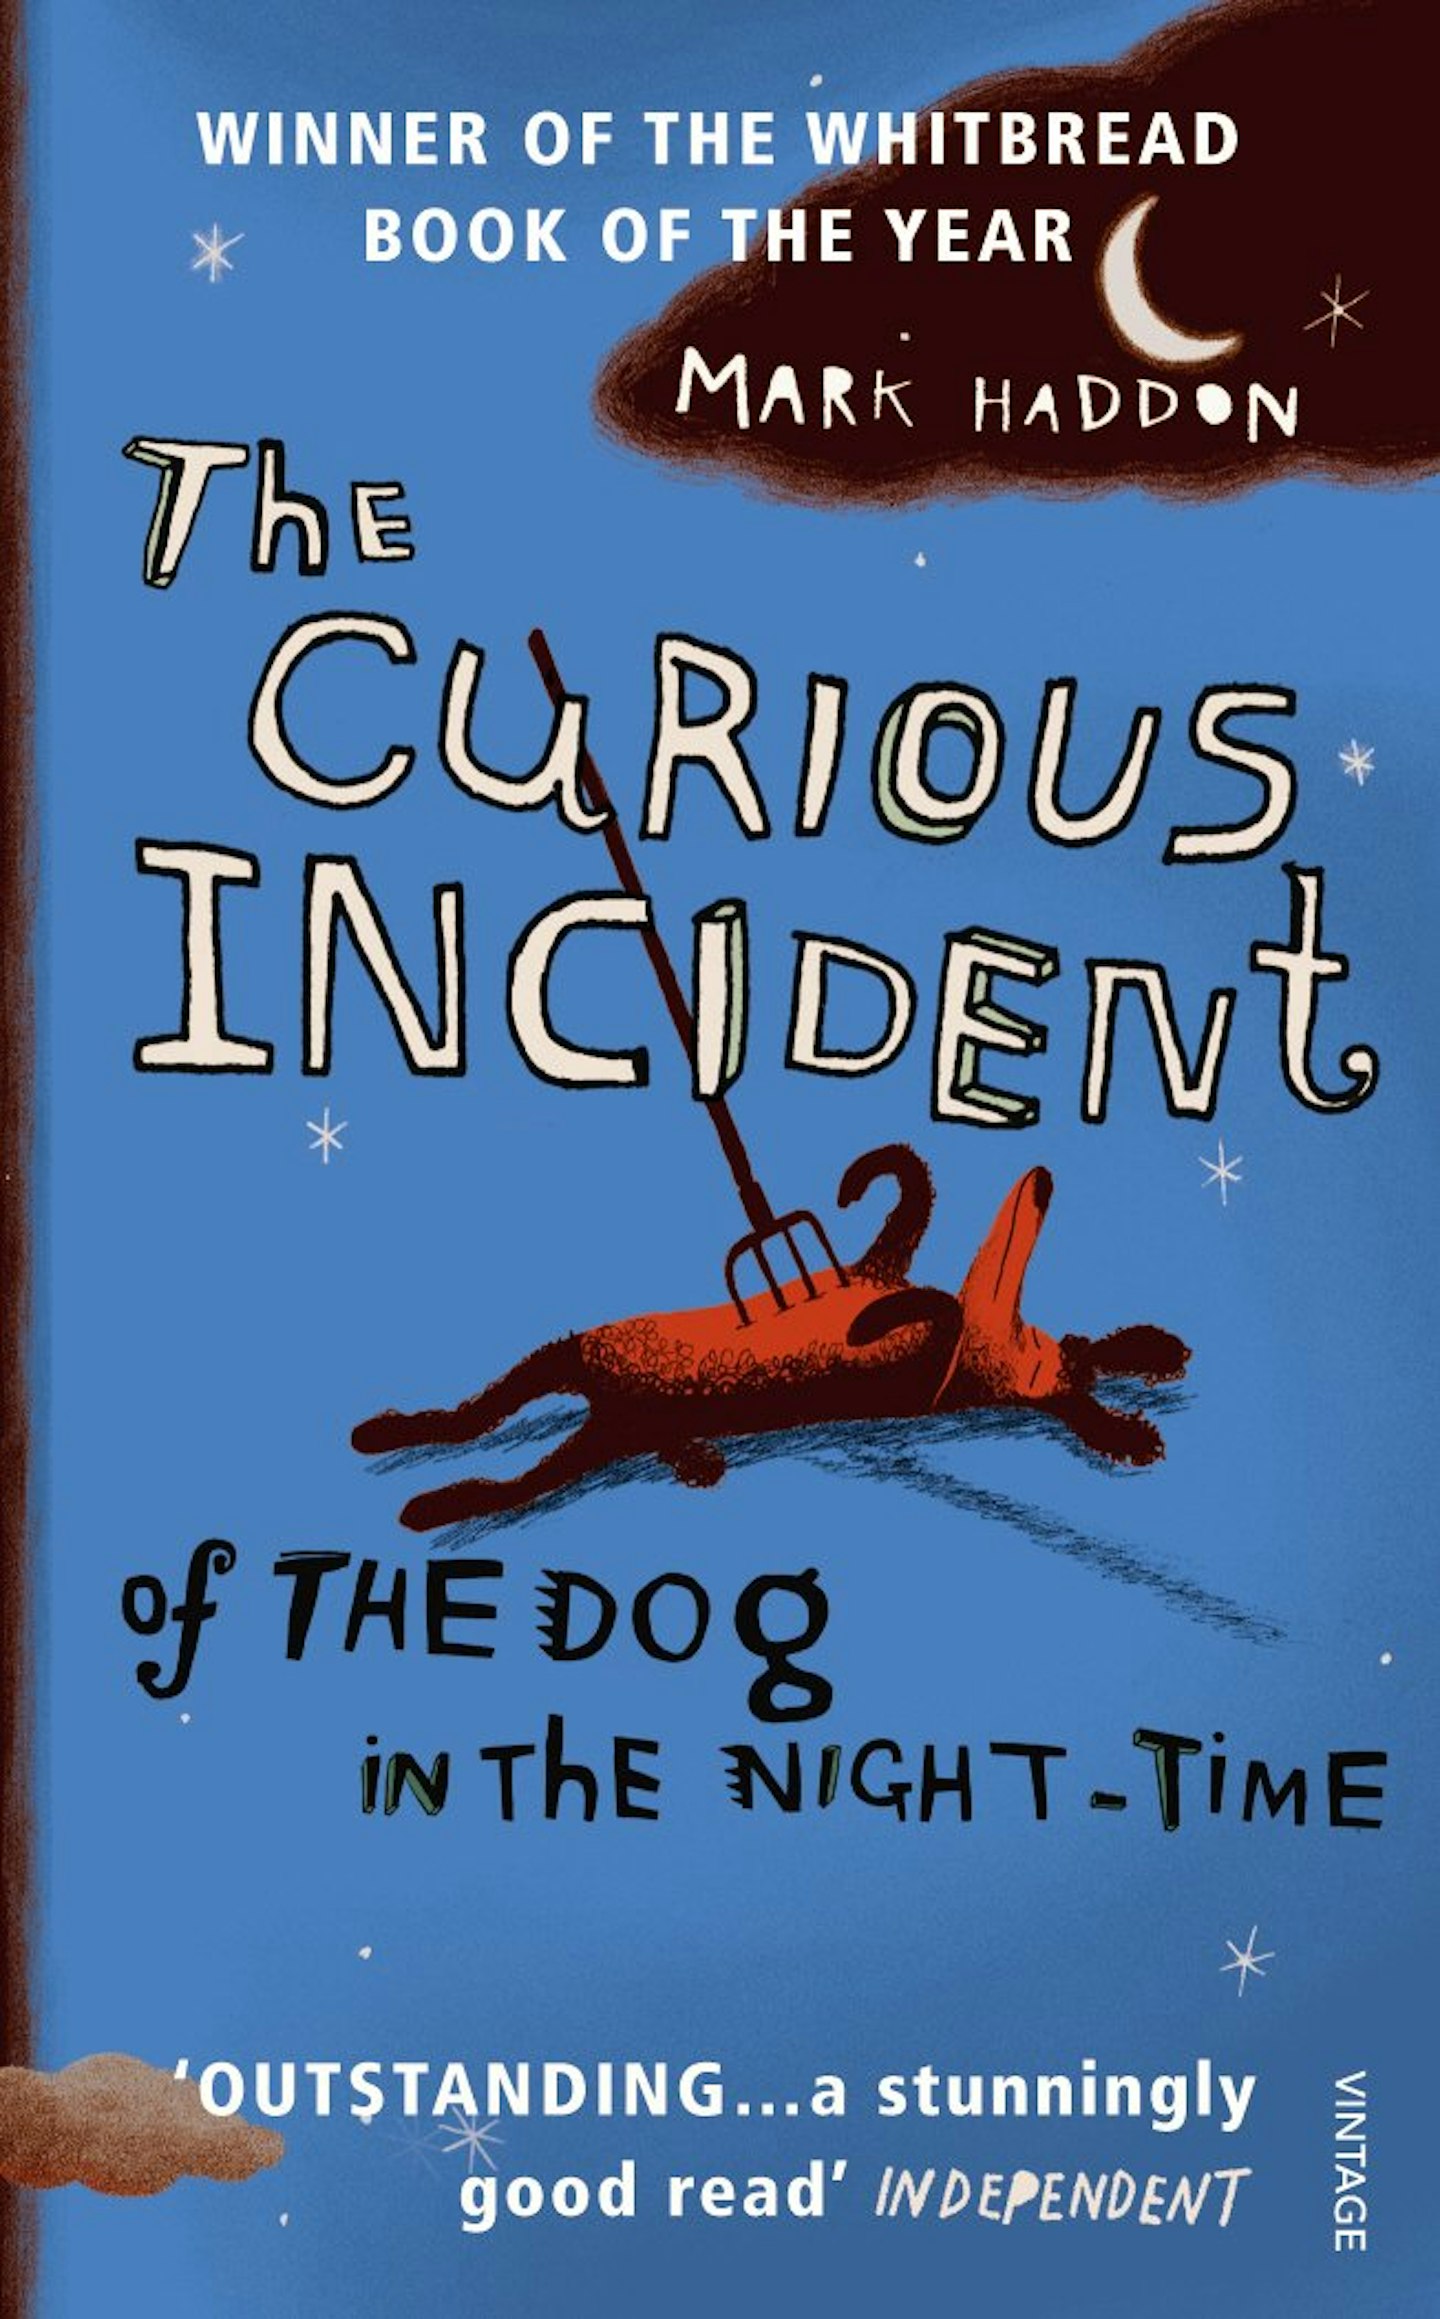 The Curious Incident of the Dog in the Night-time by Mark Haddon, £7.15